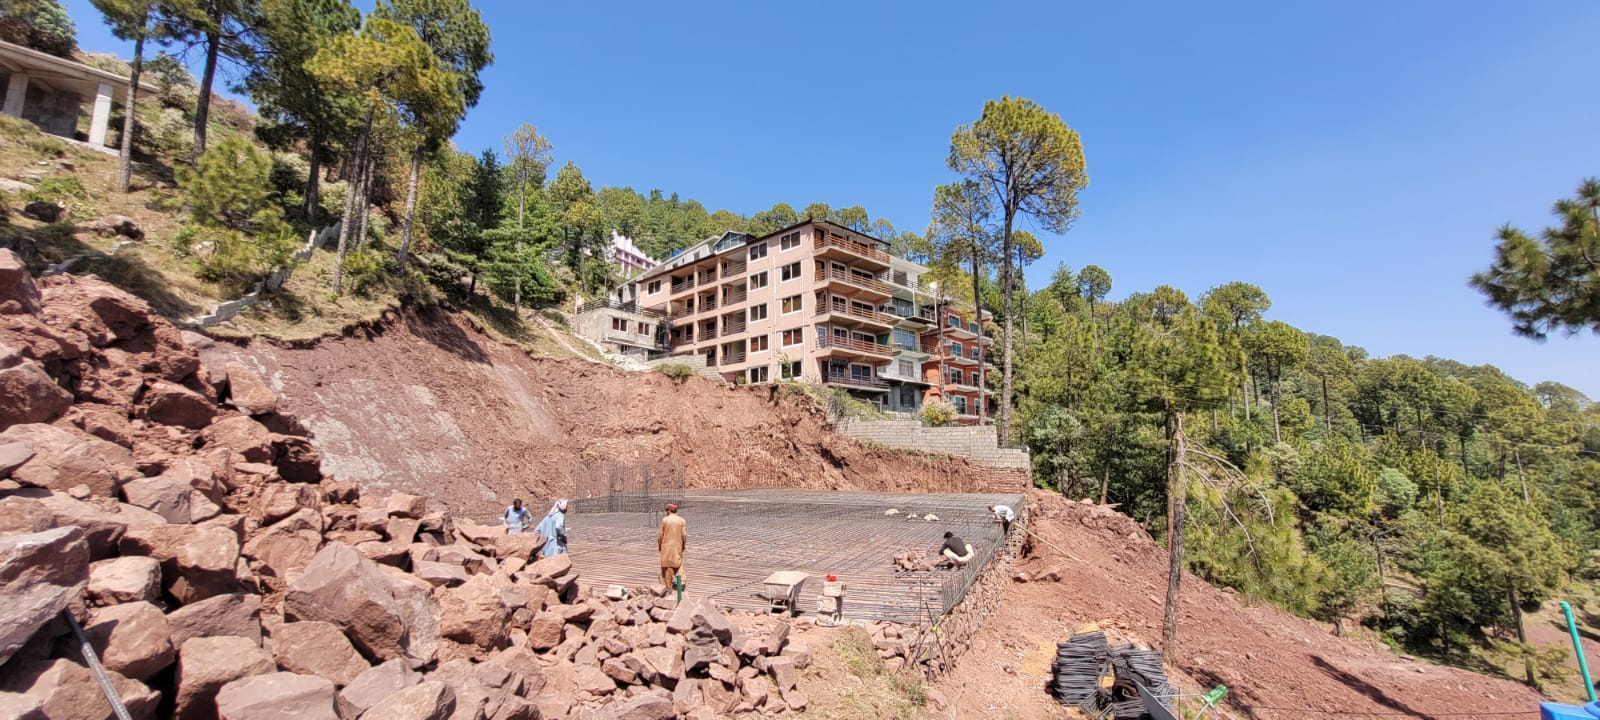 pine terraces luxury holiday apartments construction-in-progress